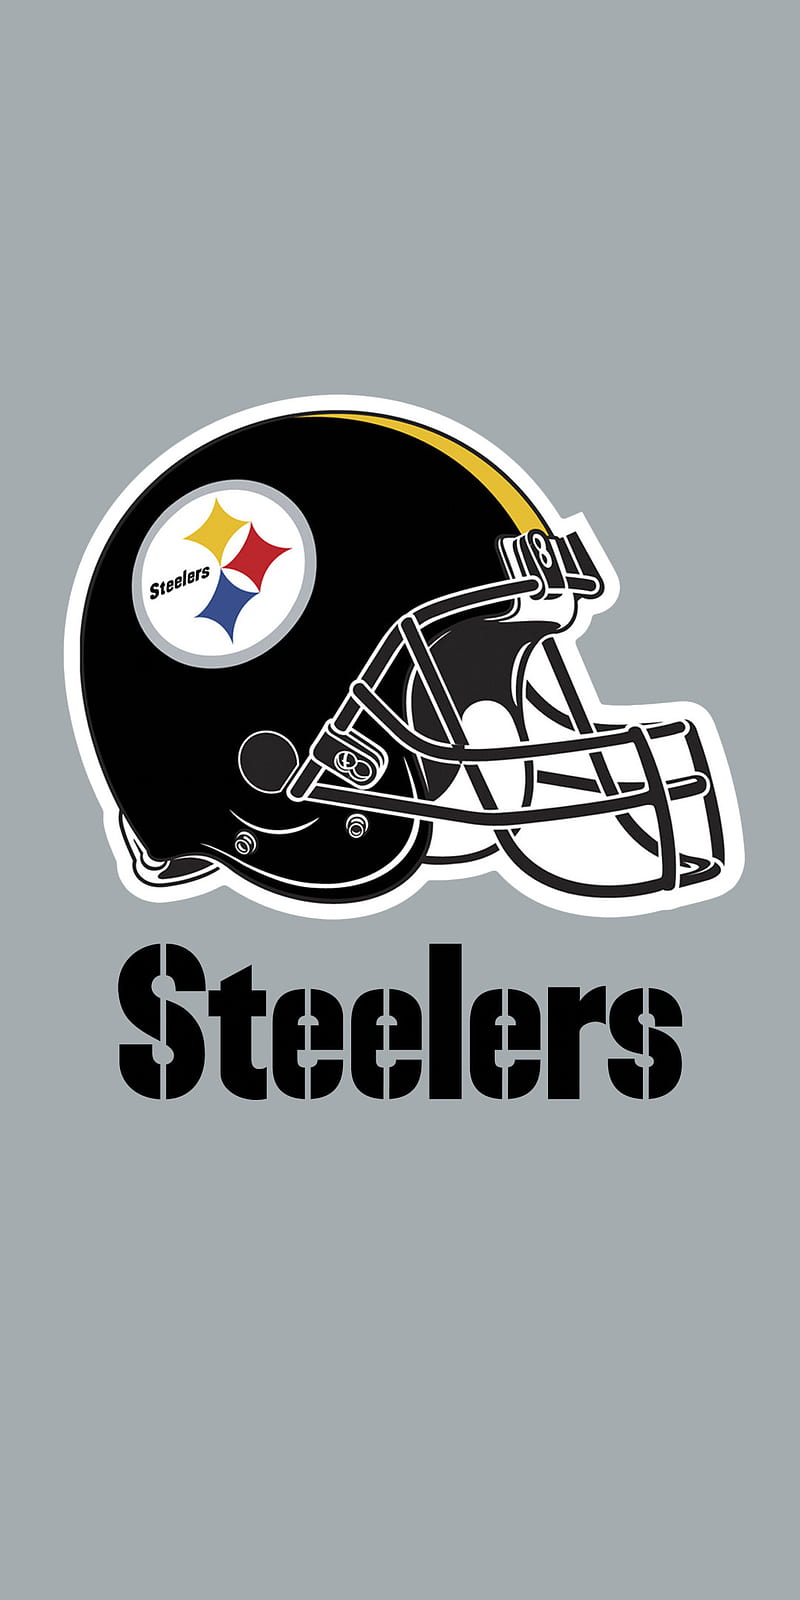 Steelers Background for Mobile Phone Wallpaper 12 of 37 Pics  HD  Wallpapers  Wallpapers Download  High Resolution Wallpapers  Pittsburgh steelers  wallpaper Pittsburgh steelers Steelers